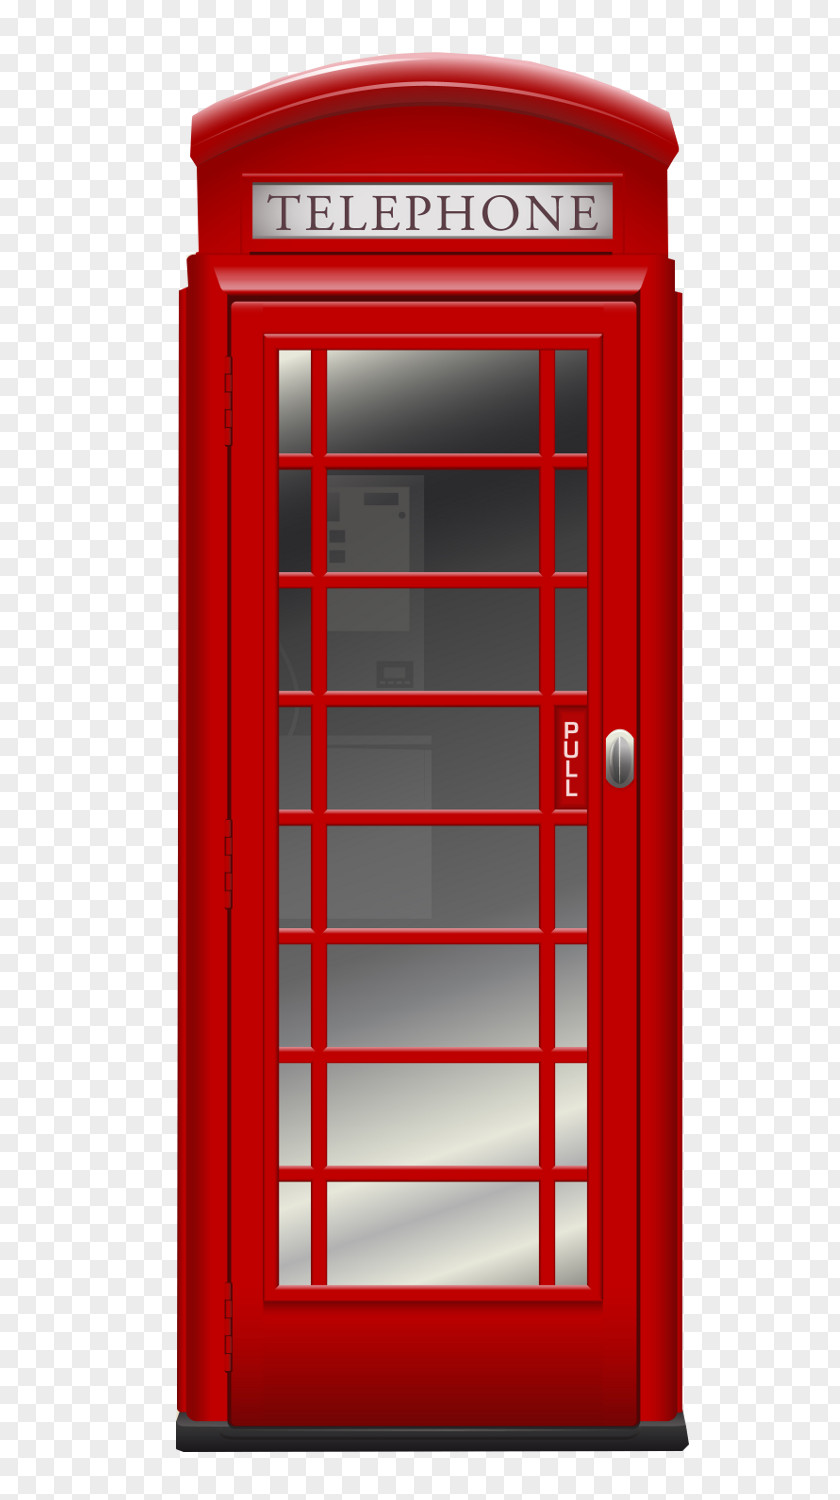 London IPhone Telephone Booth Red Box PNG